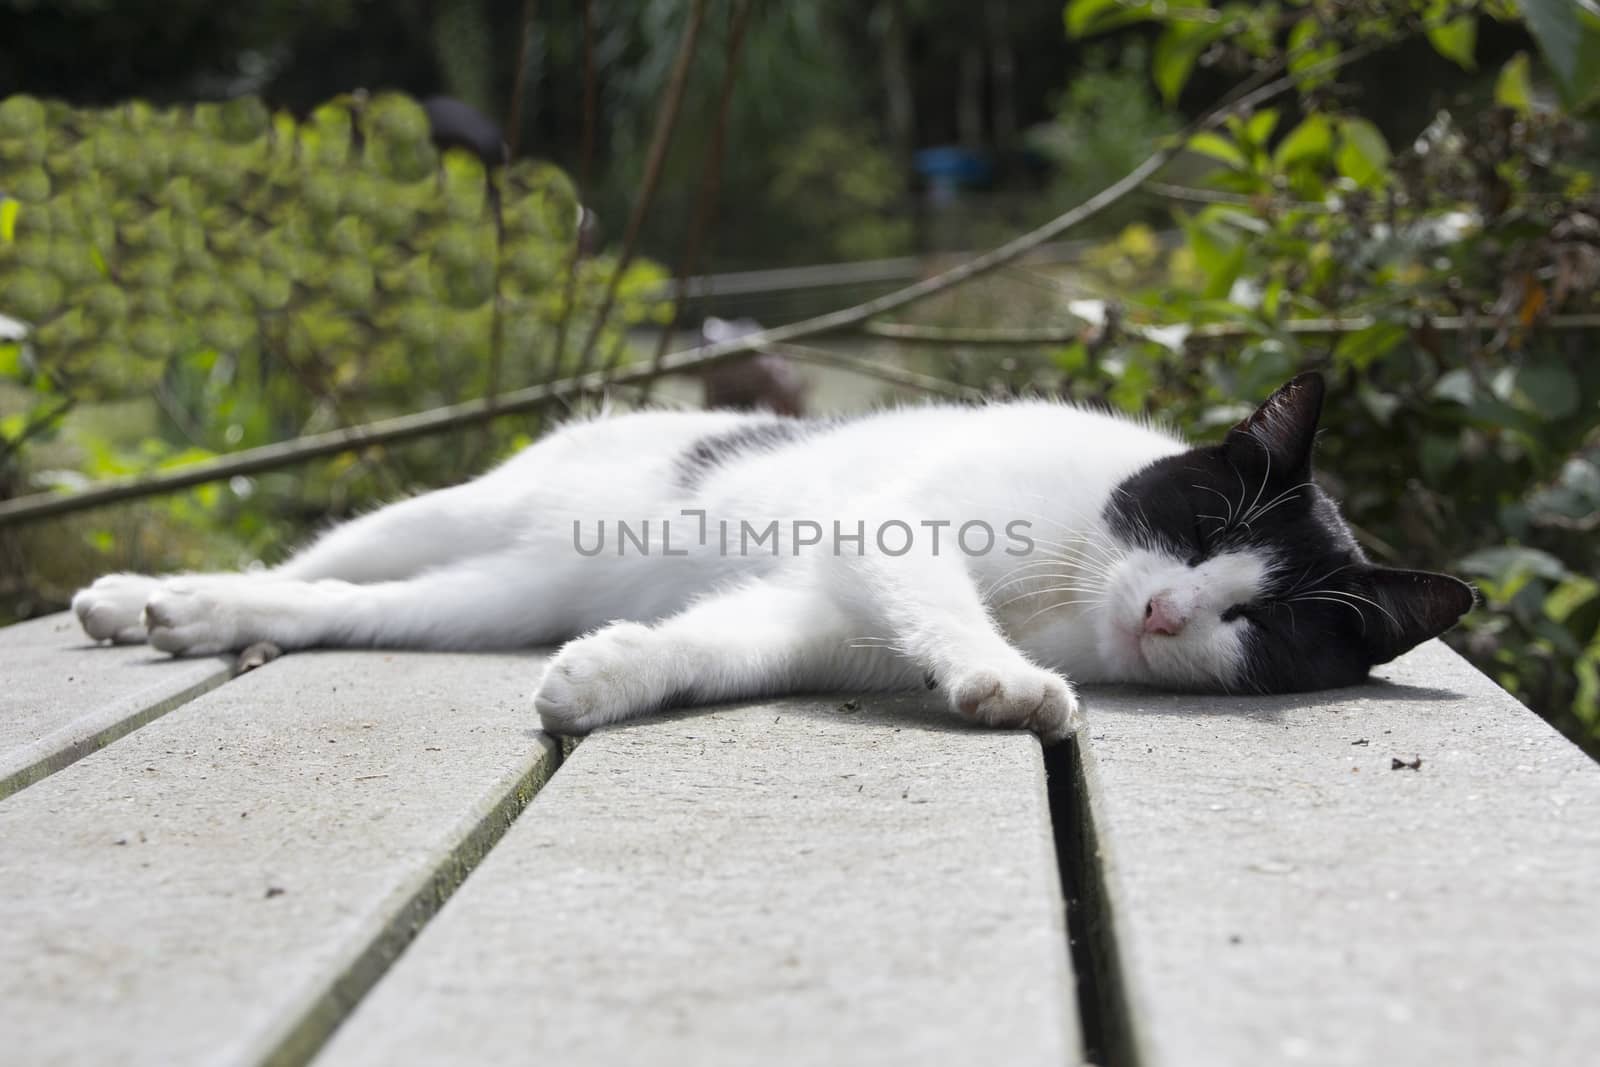 Black and white cat, sleeping on a table